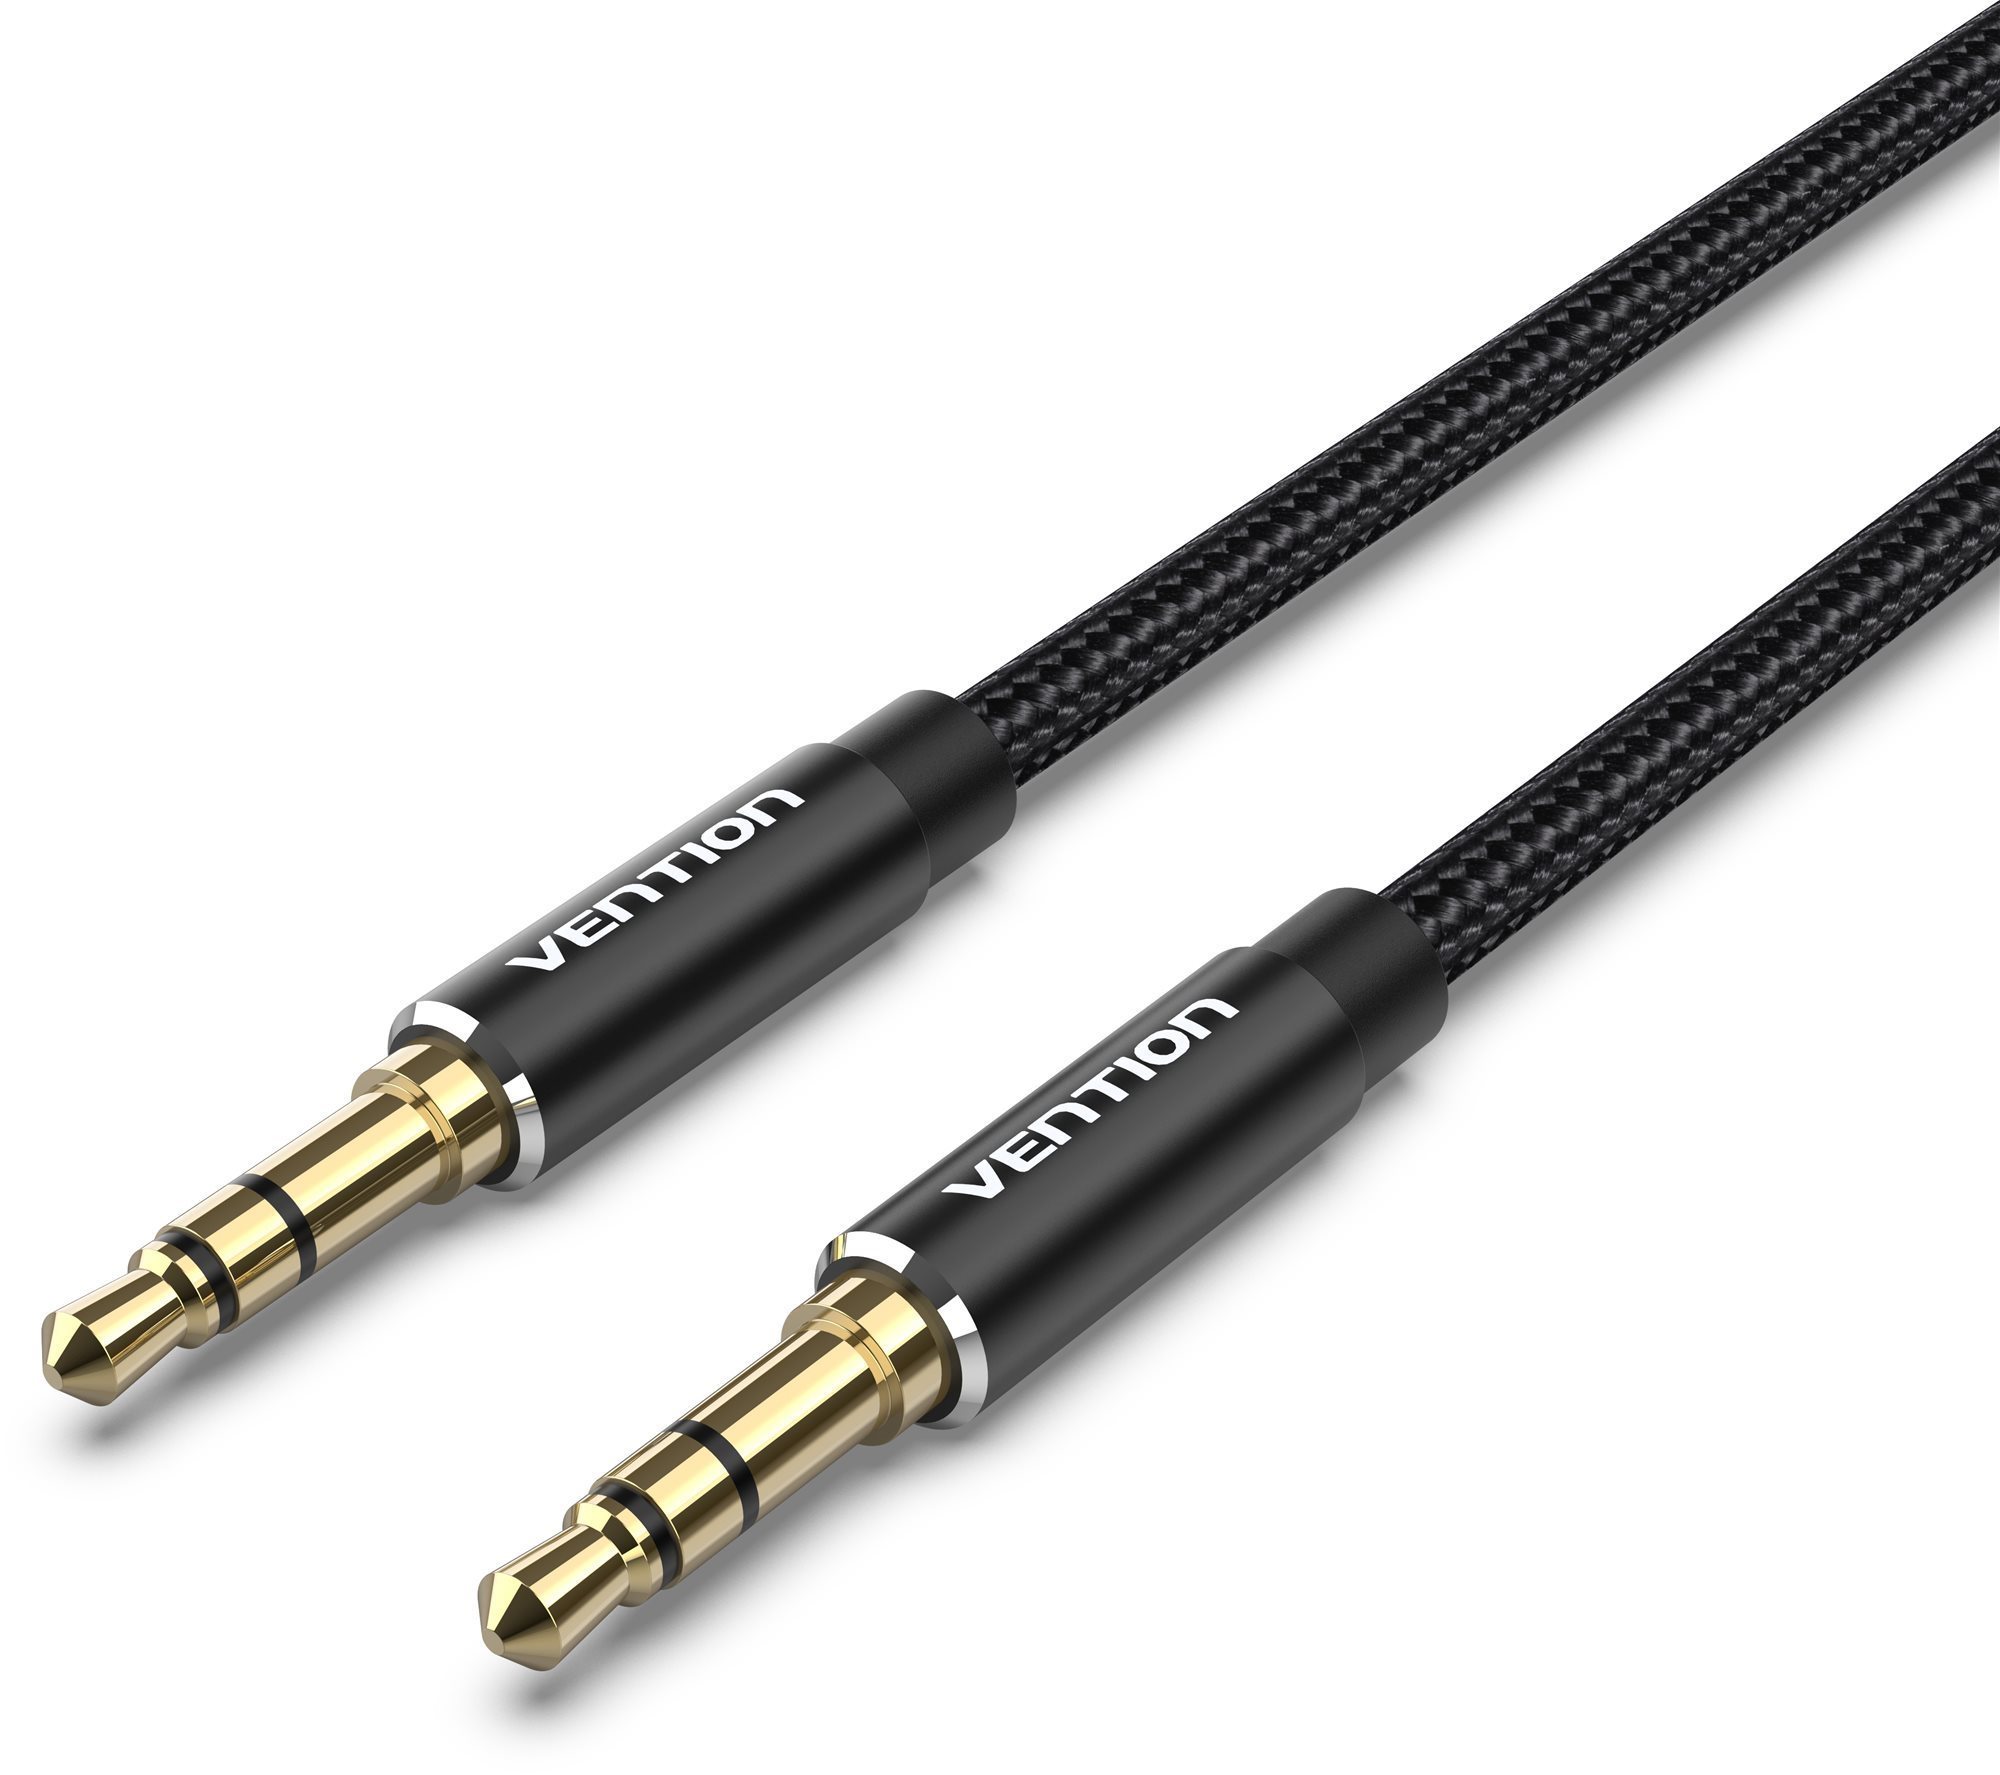 Vention Cotton Braided 3,5 mm Male to Male Audio Cable 3 m Black Aluminum Alloy Type